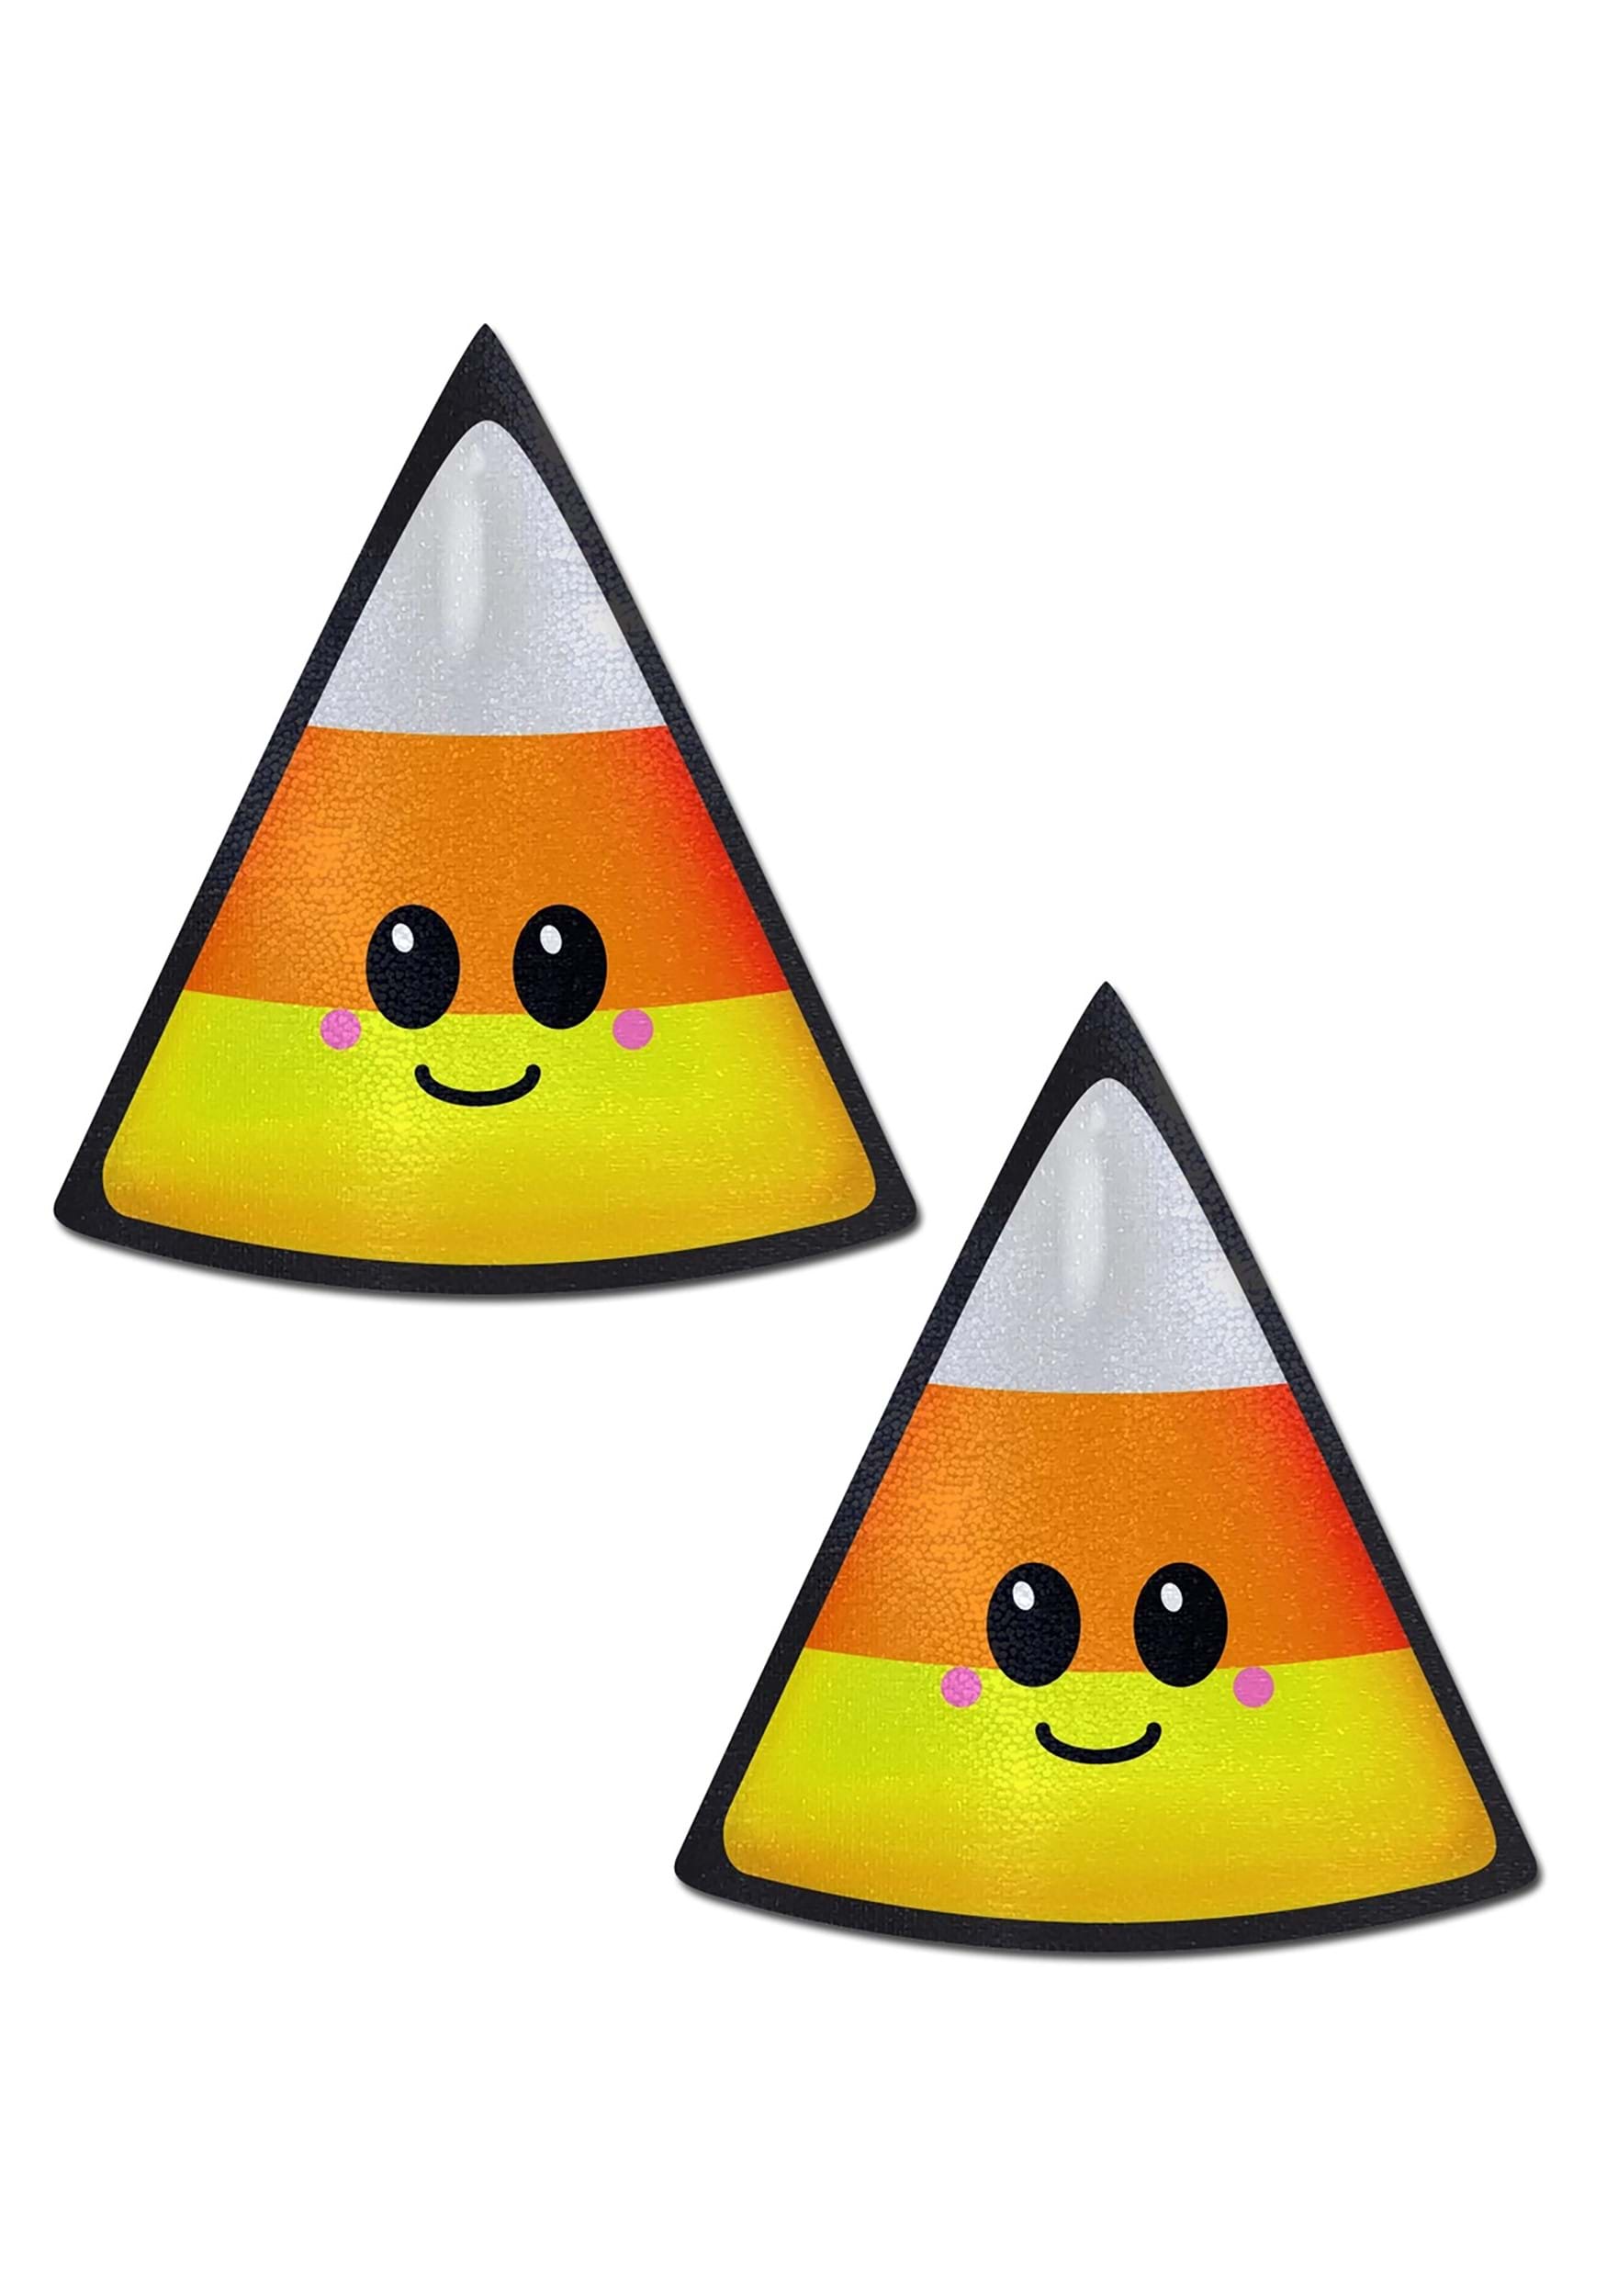 Pastease Candy Corn Fancy Dress Costume Pasties